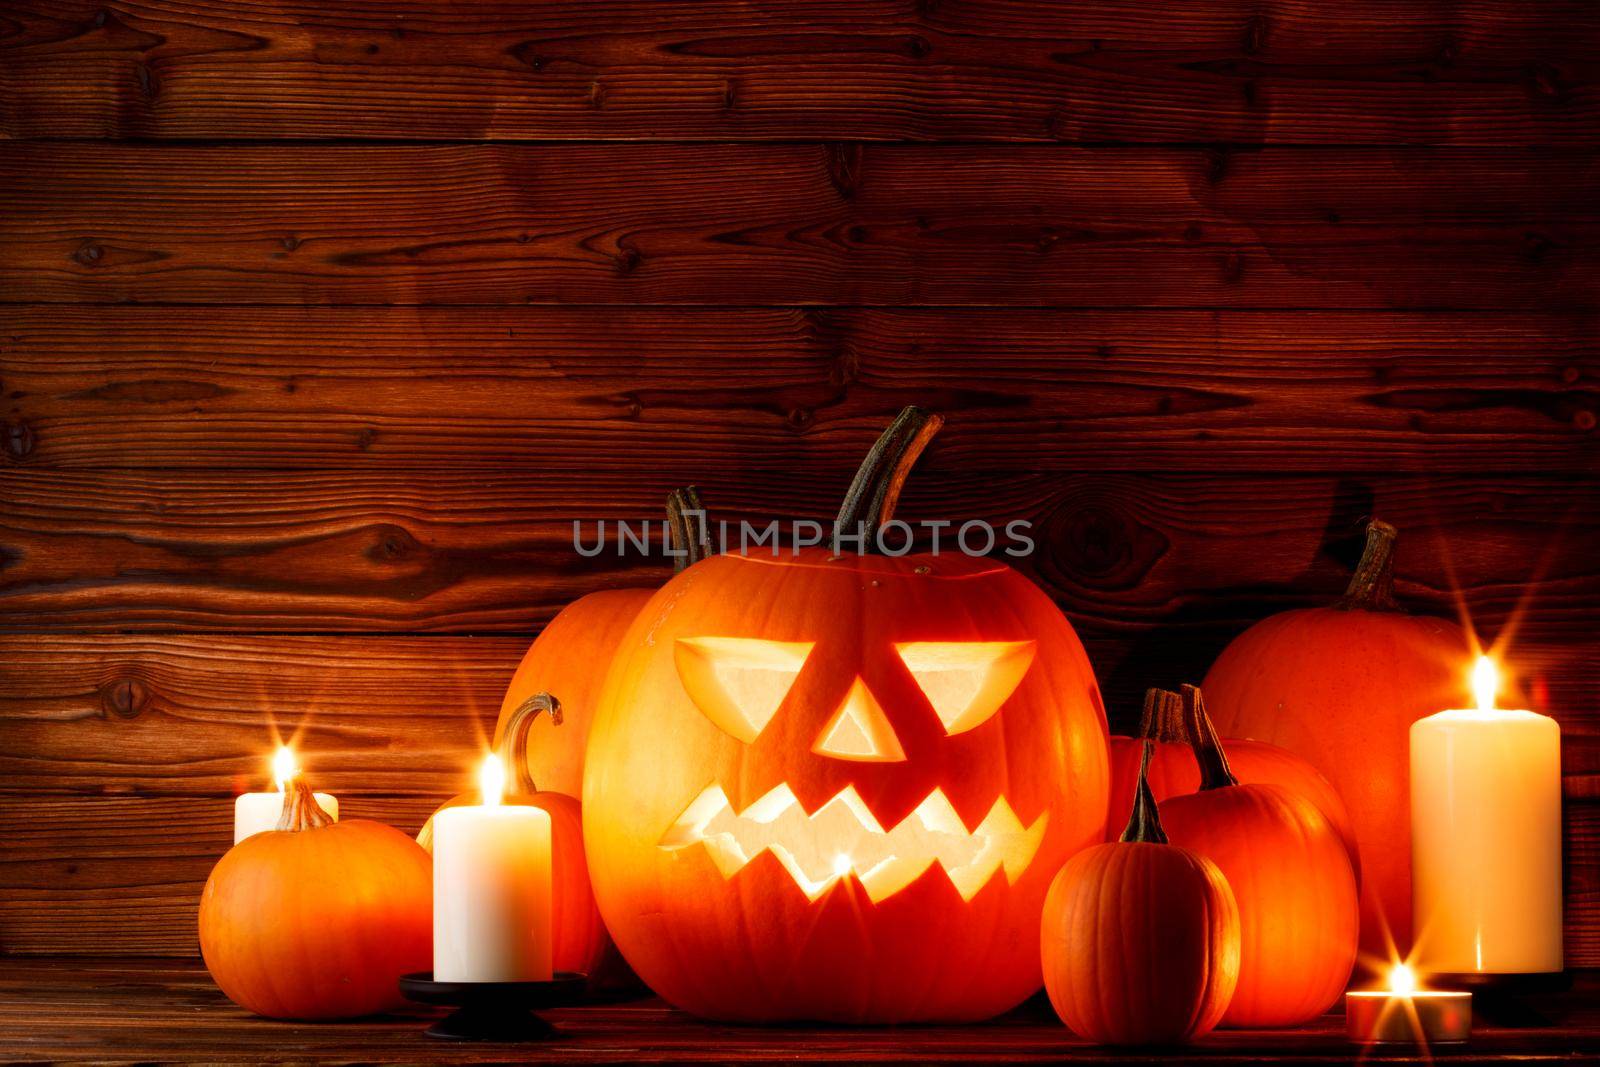 Halloween pumpkins and candles by Yellowj